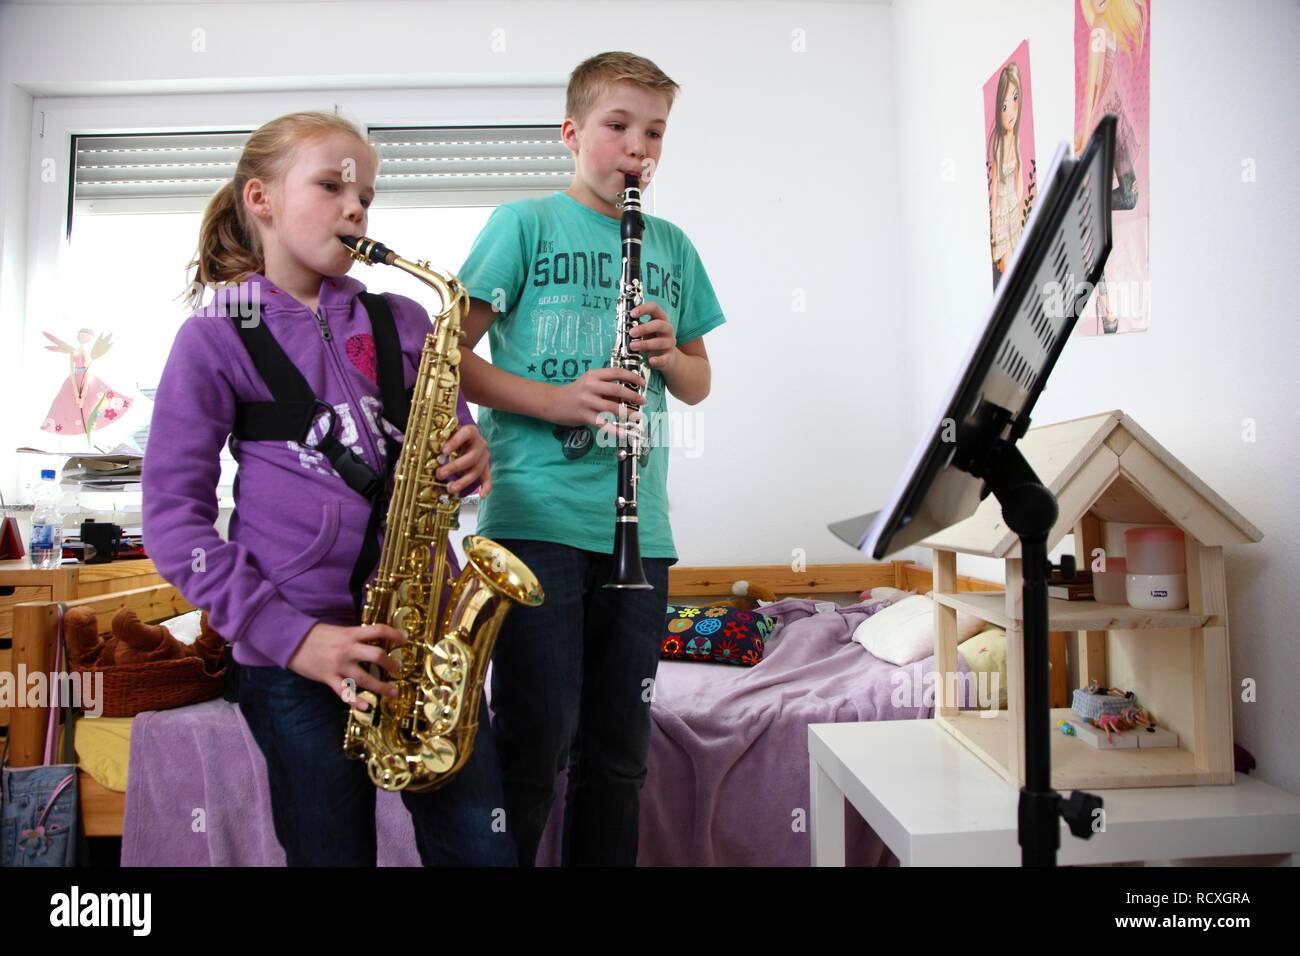 Siblings, a boy, 12 years, and a girl, 10 years, practising clarinet and saxophone in their room Stock Photo